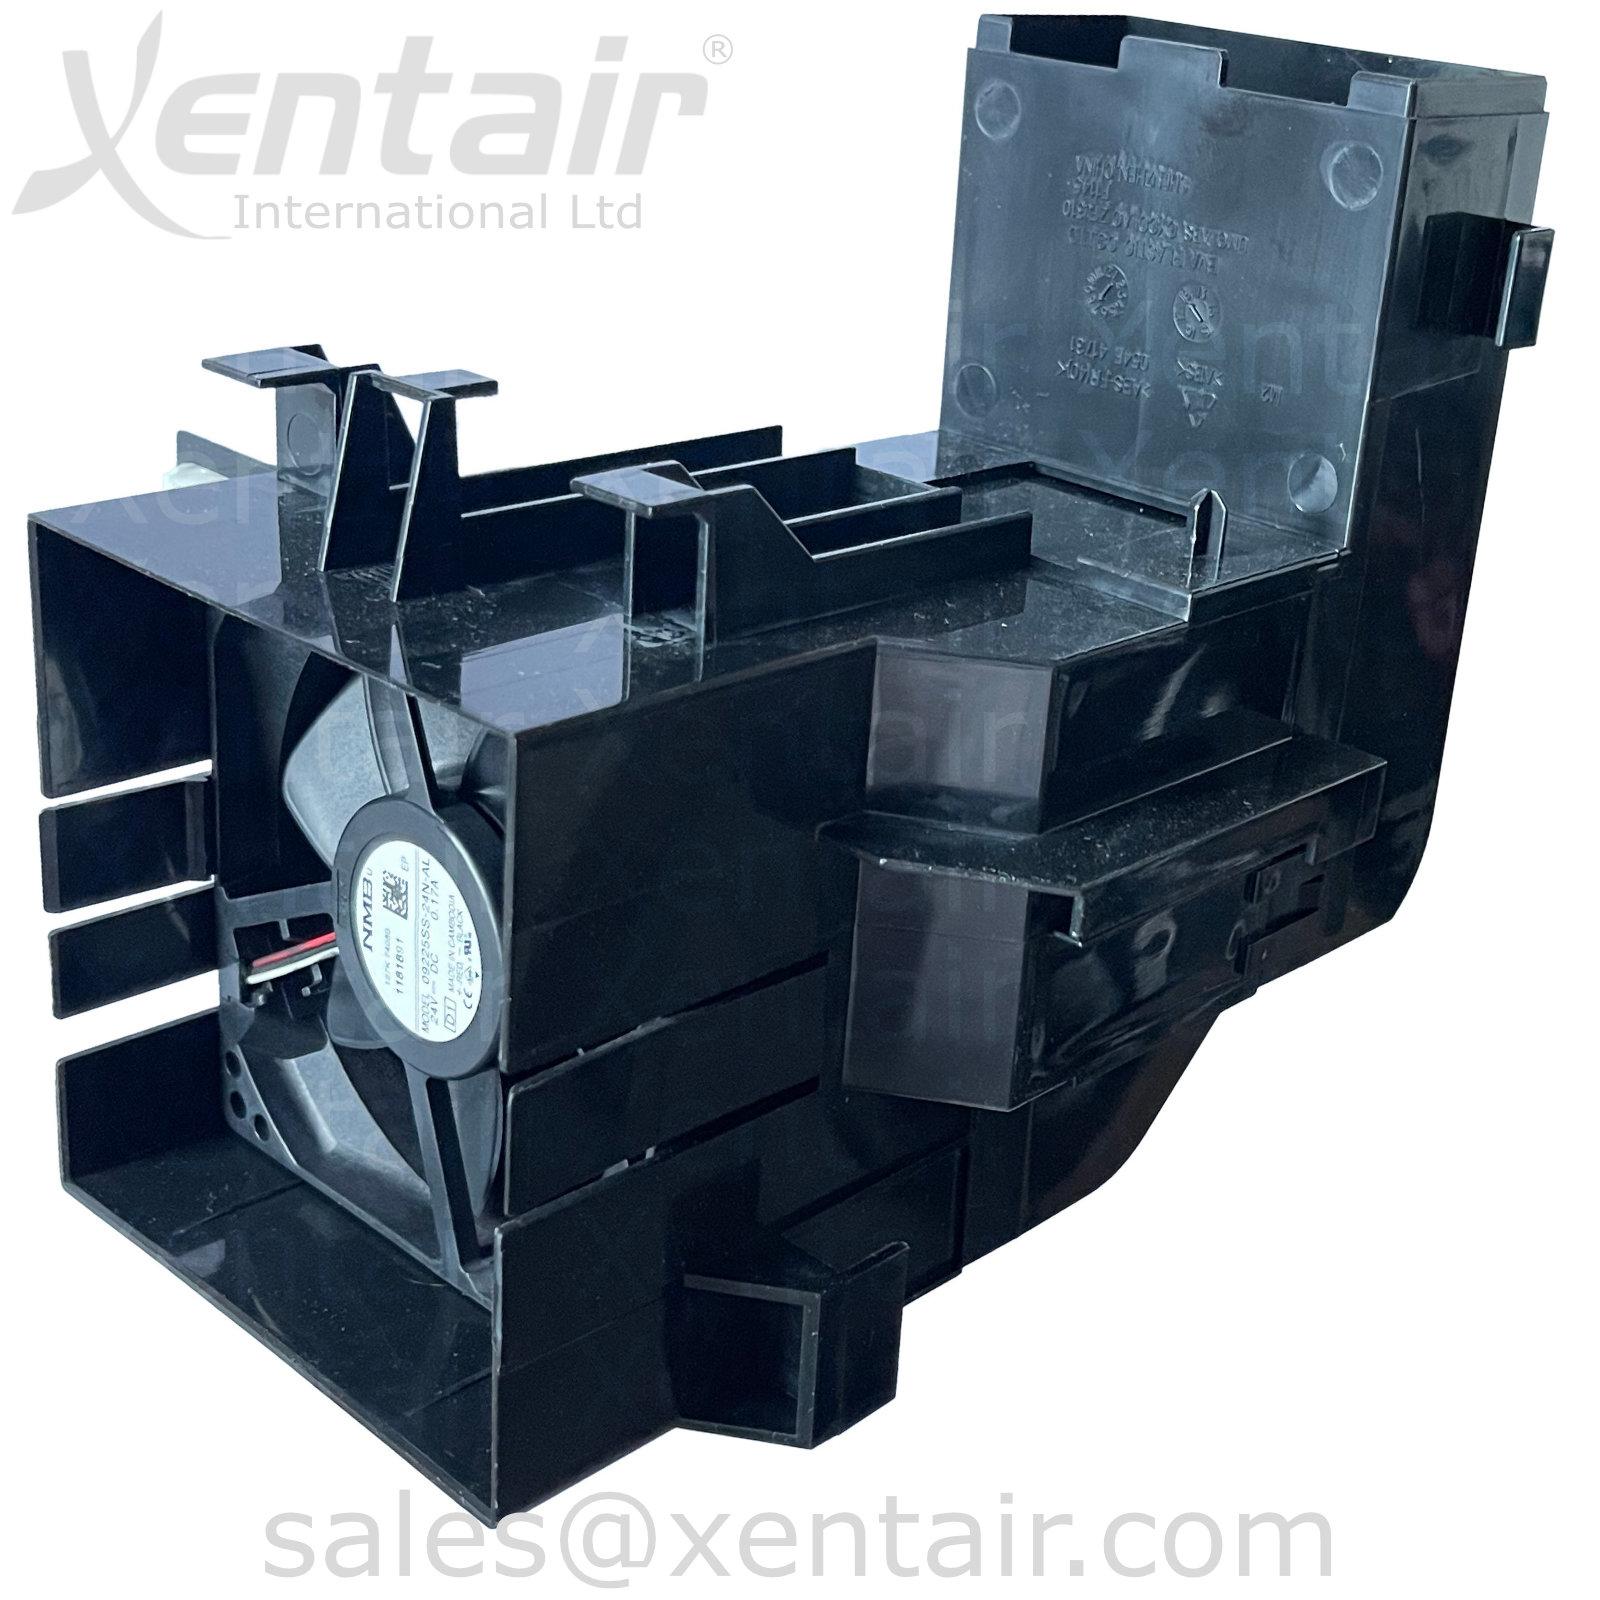 Xerox® AltaLink® C8030 C8035 C8045 C8055 C8070 Fuser Fan and Duct Assembly 054K48181 54K48181